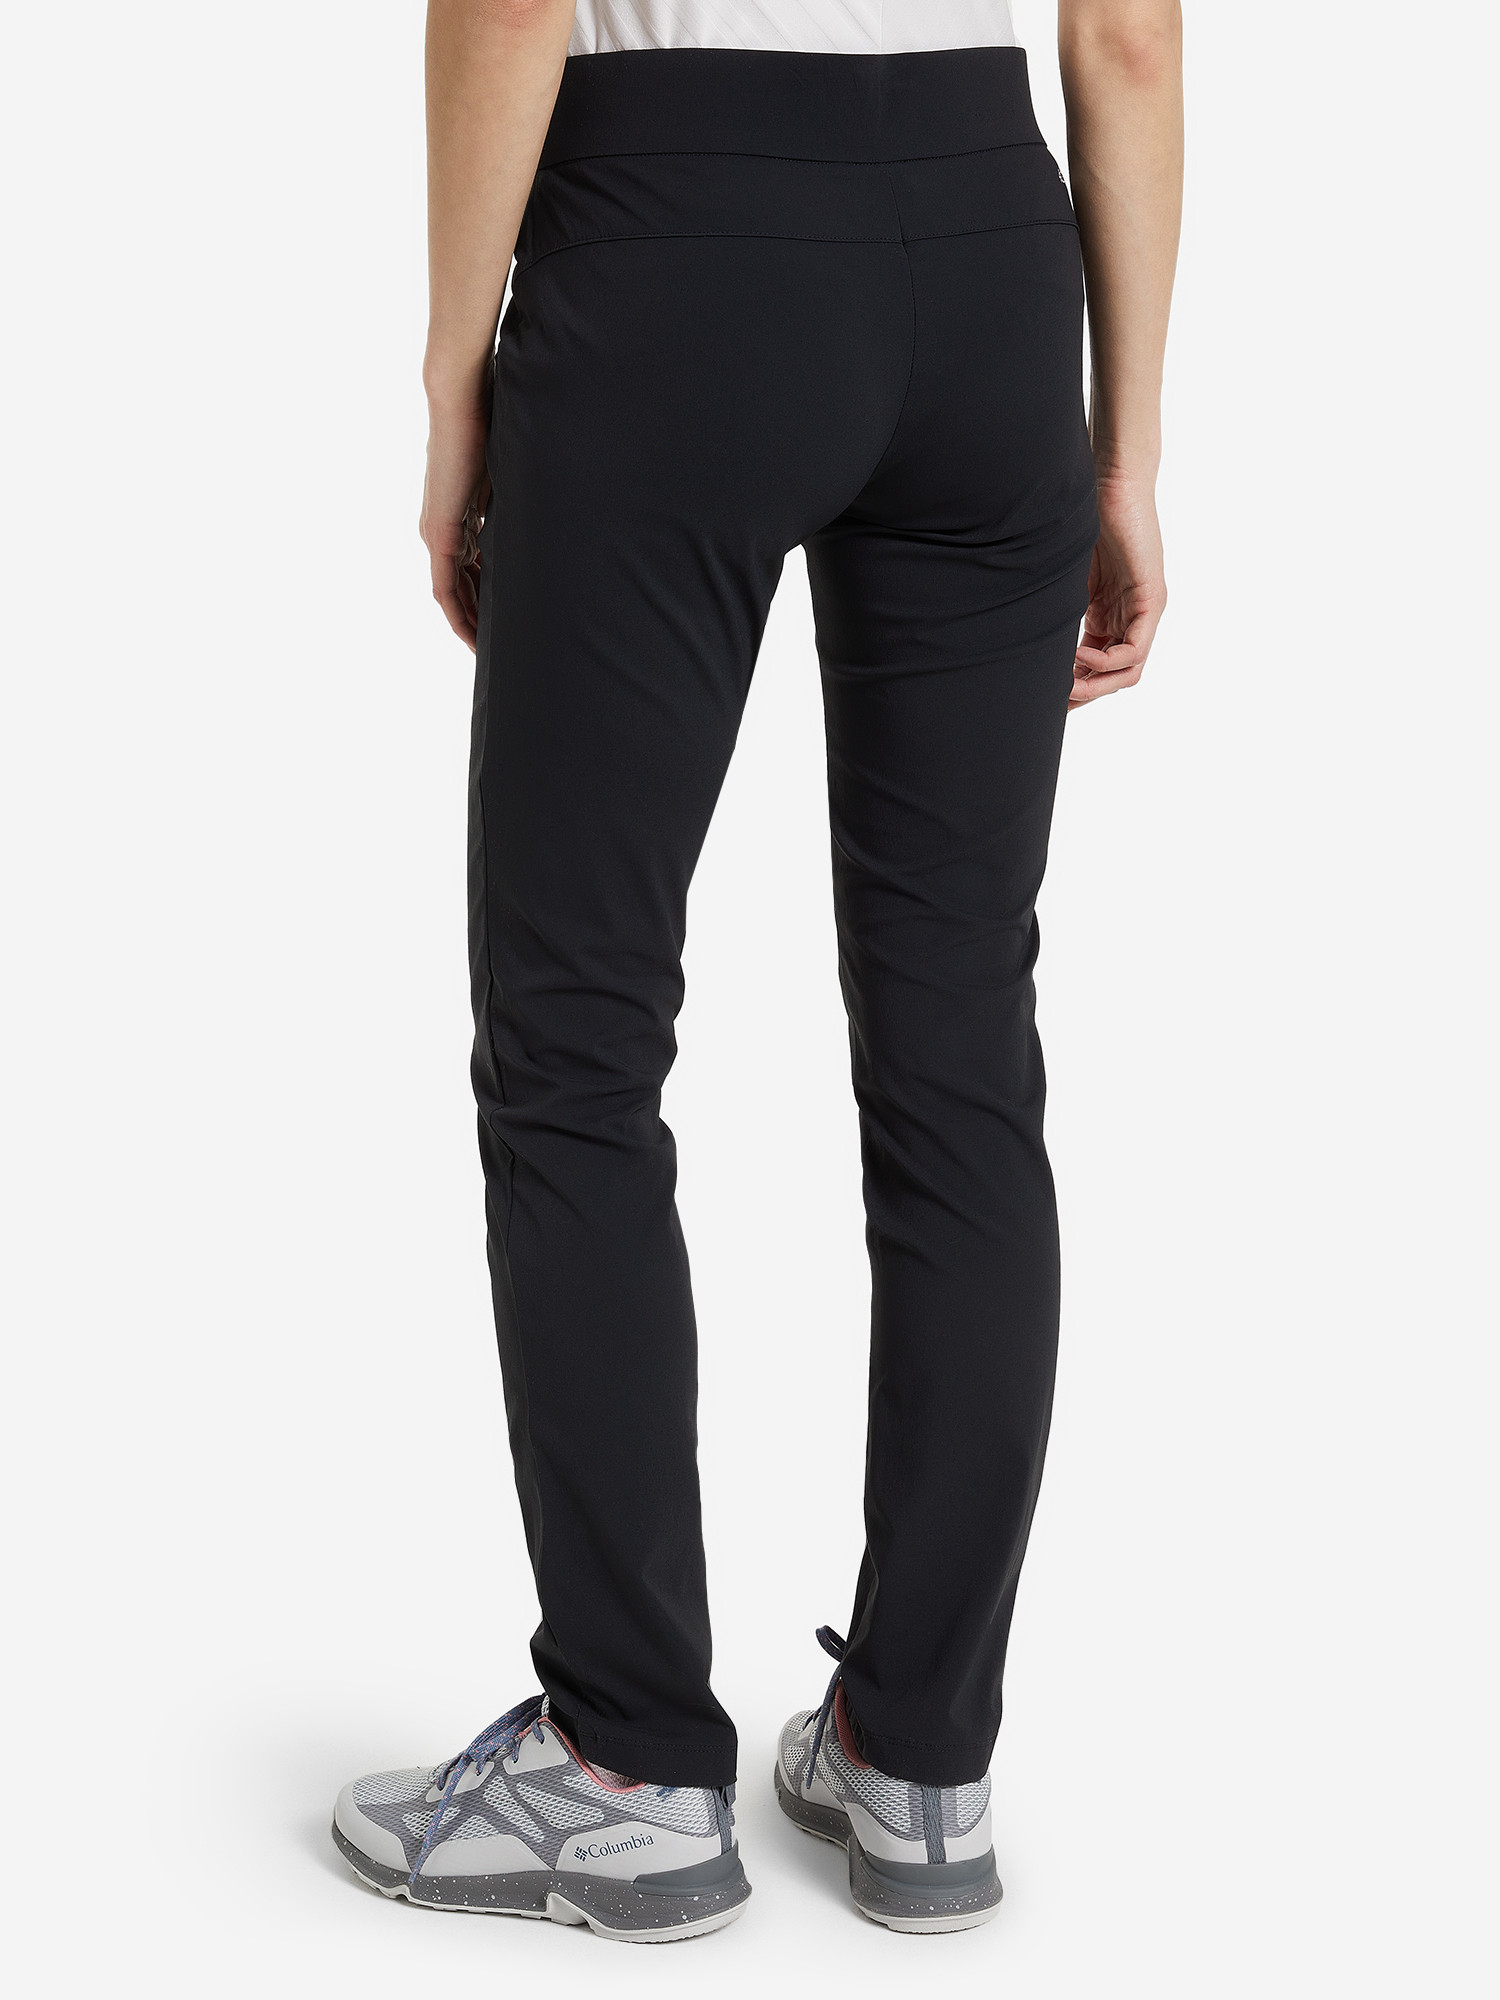 Брюки женские Columbia Anytime Casual Pull On Pant